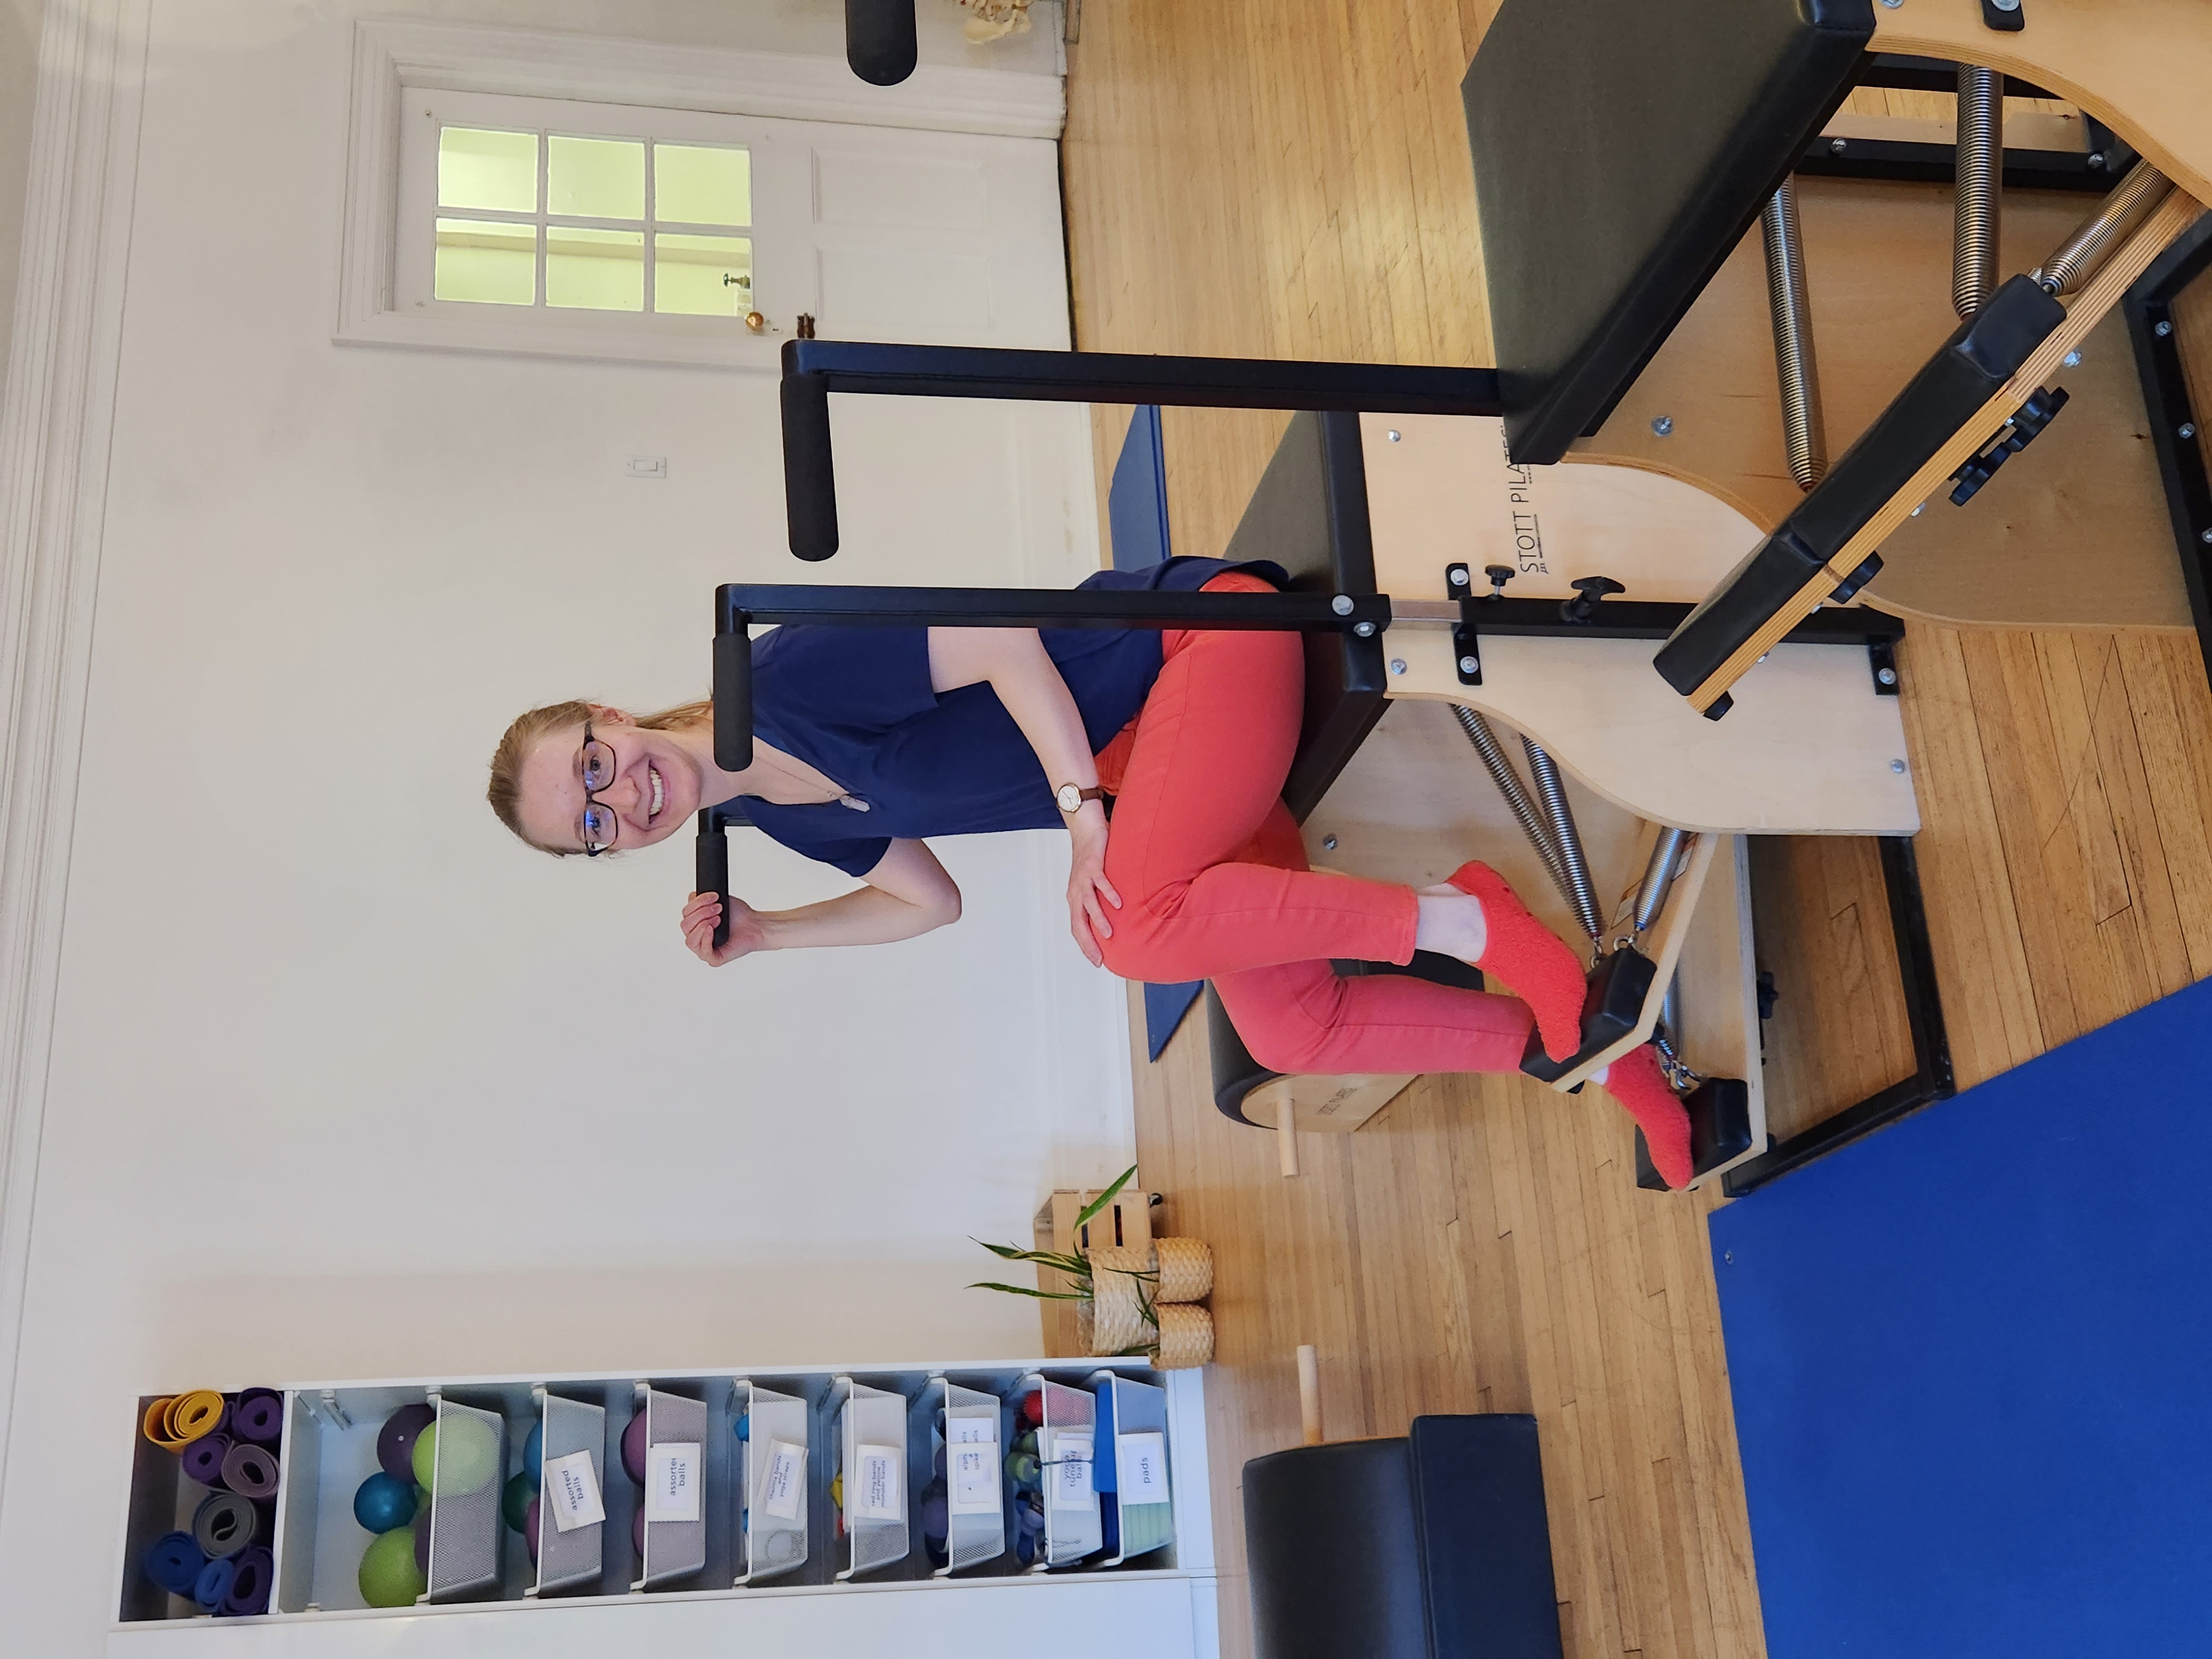 Emily is sitting on the PIlates chair smiling. She is wearing a blue shirt and red leggings and socks.